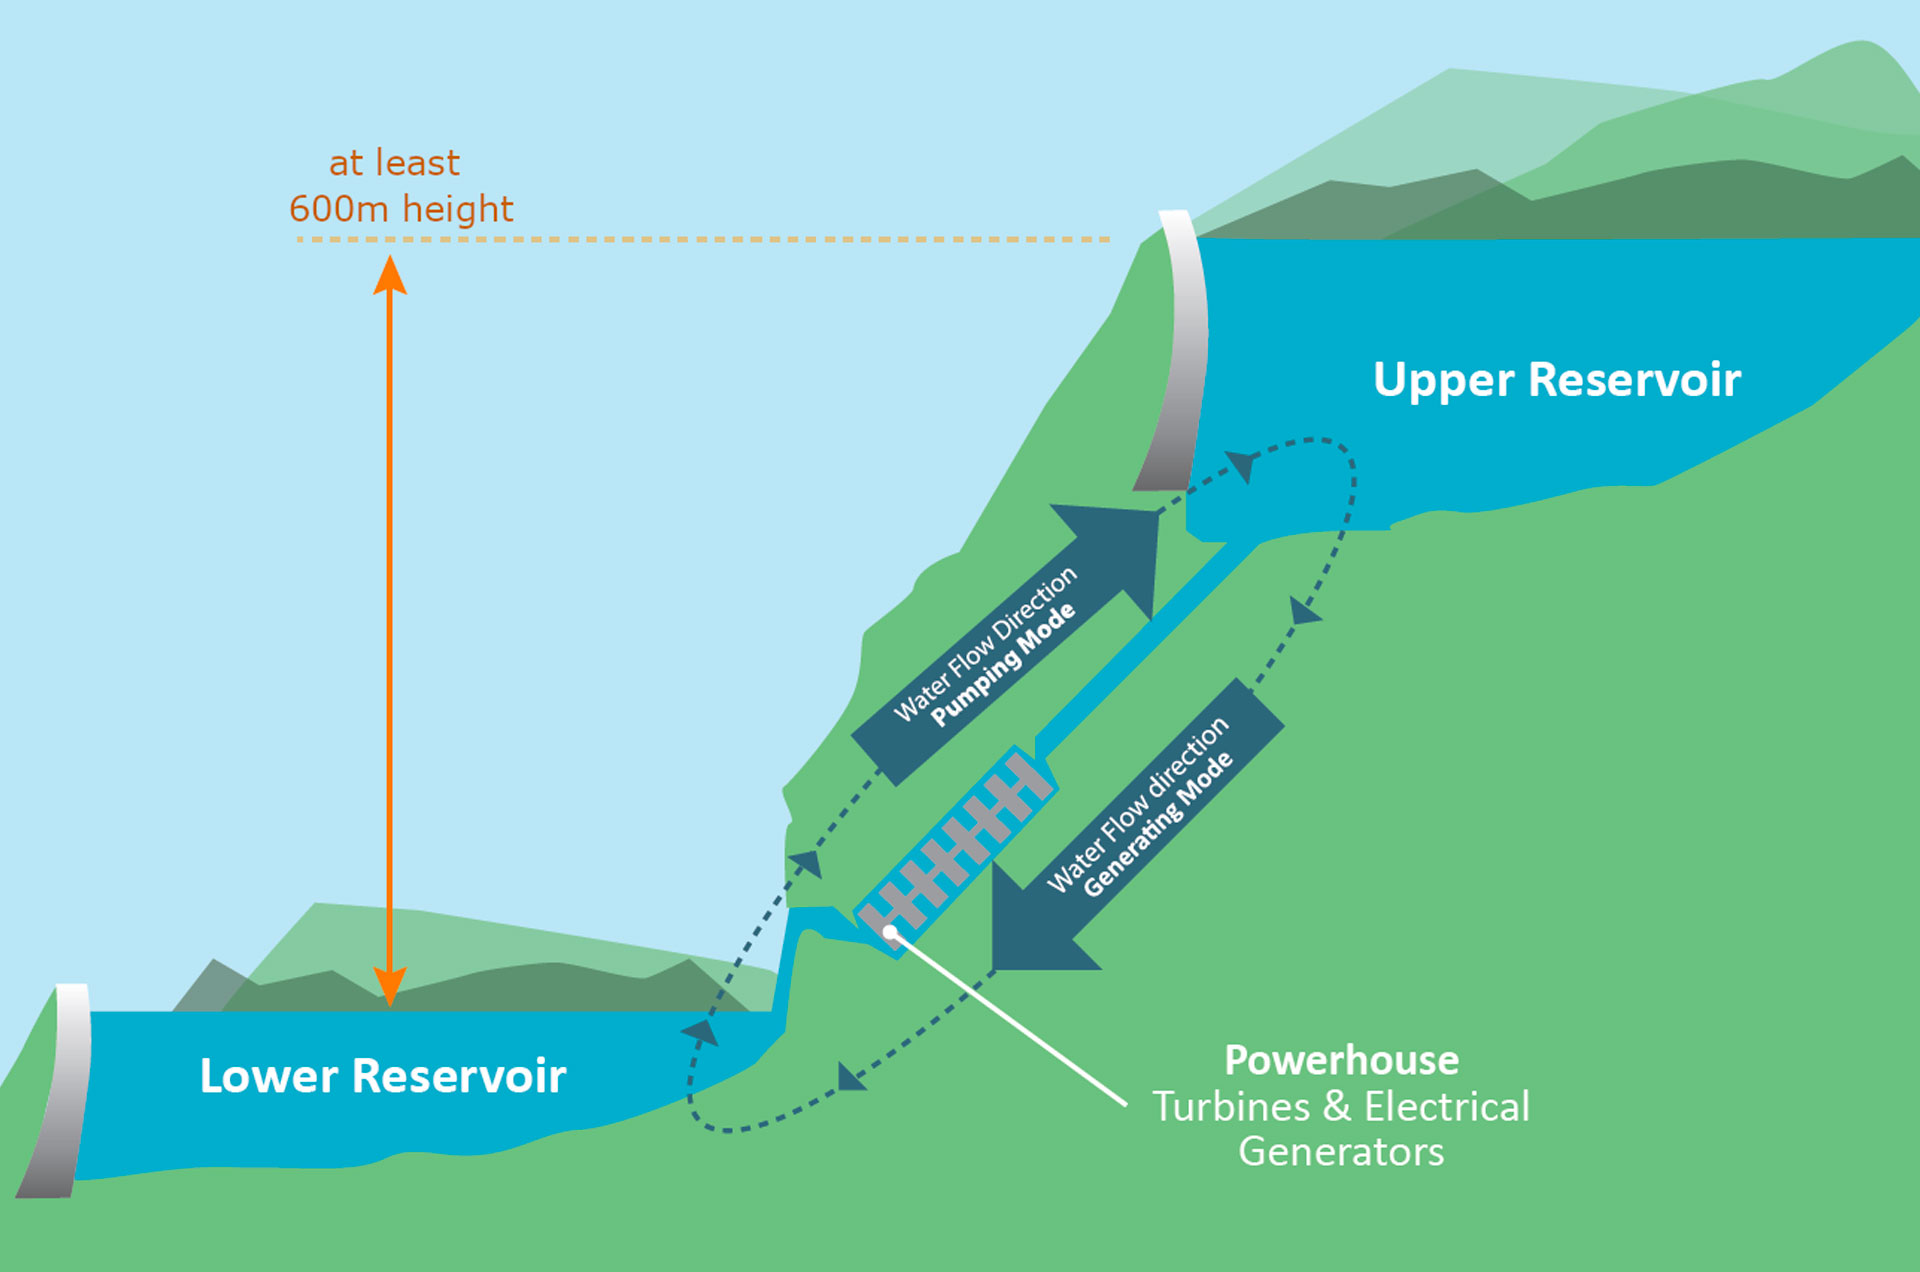 Image - Diagram depicting how the Oven Mountain OMPS PHES project will work